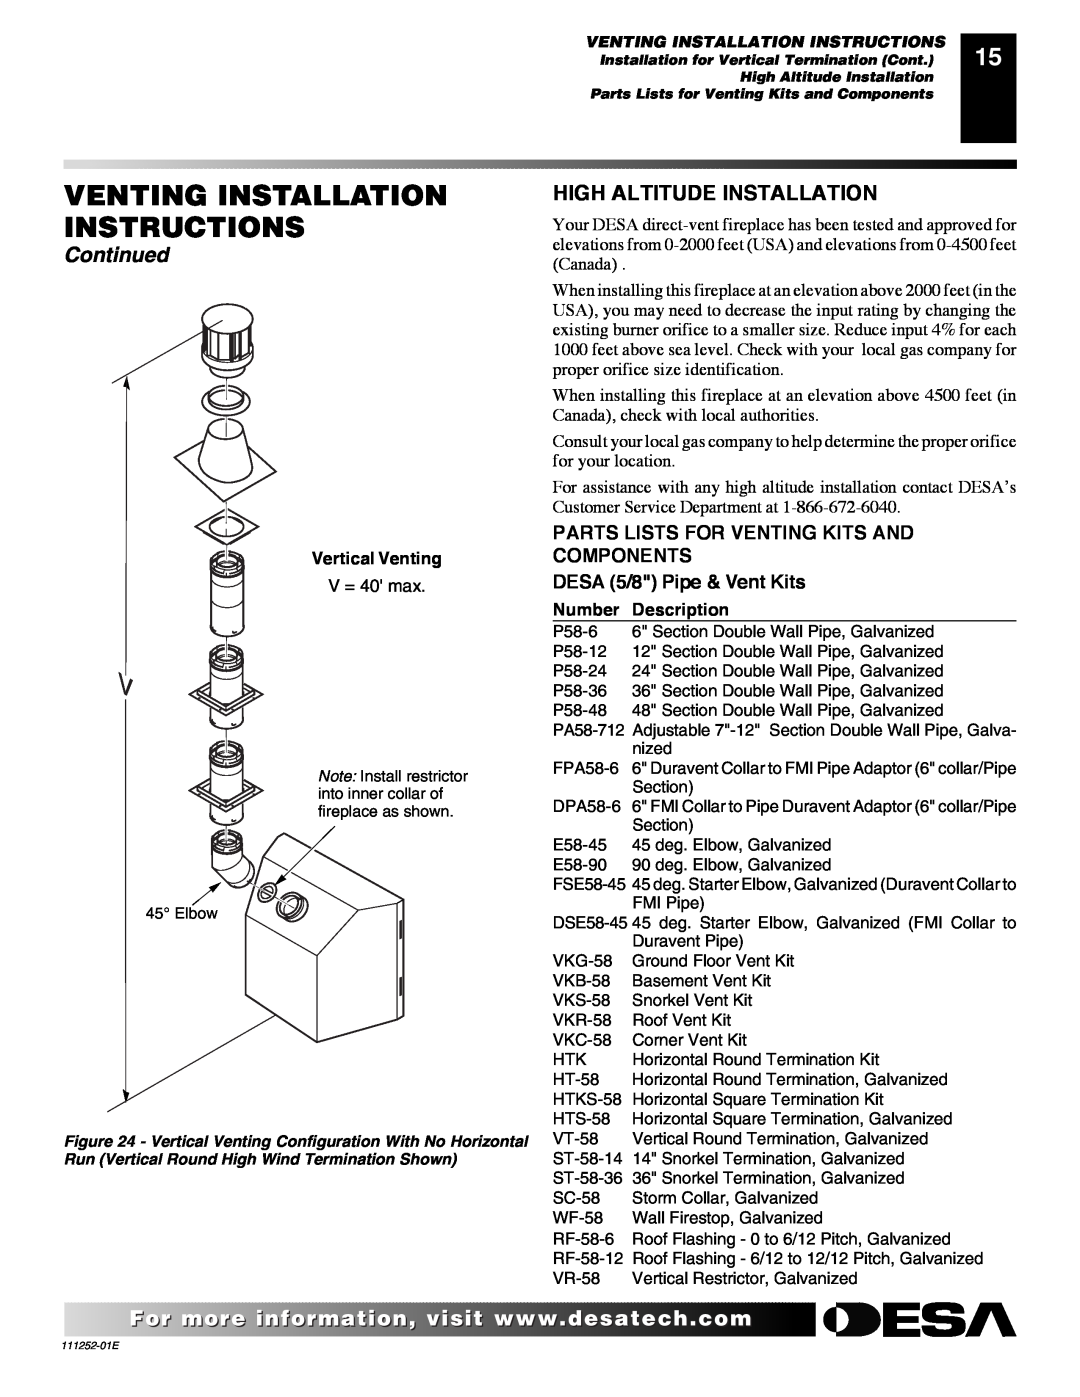 Desa CHDV36NR-C High Altitude Installation, Parts Lists For Venting Kits And Components, DESA 5/8 Pipe & Vent Kits 